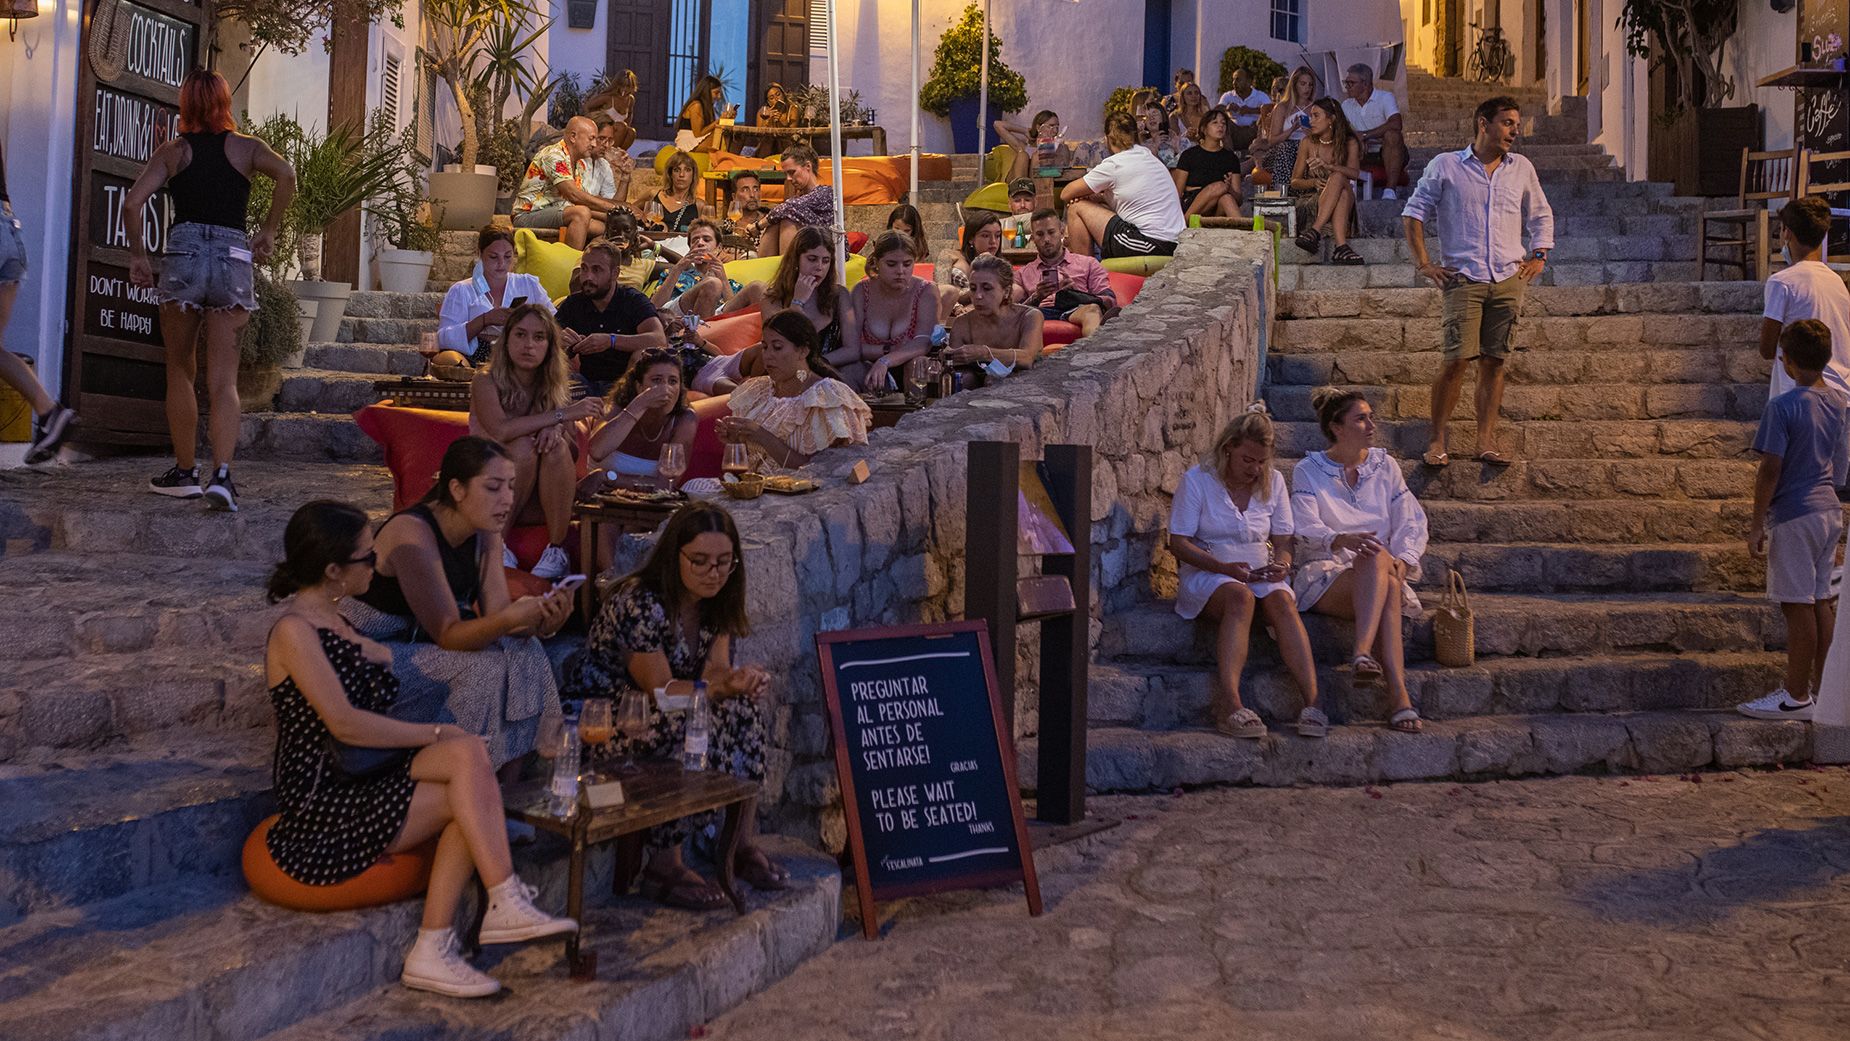 Many nights out in Spain end well into the early hours, with restaurants serving meals up to midnight.